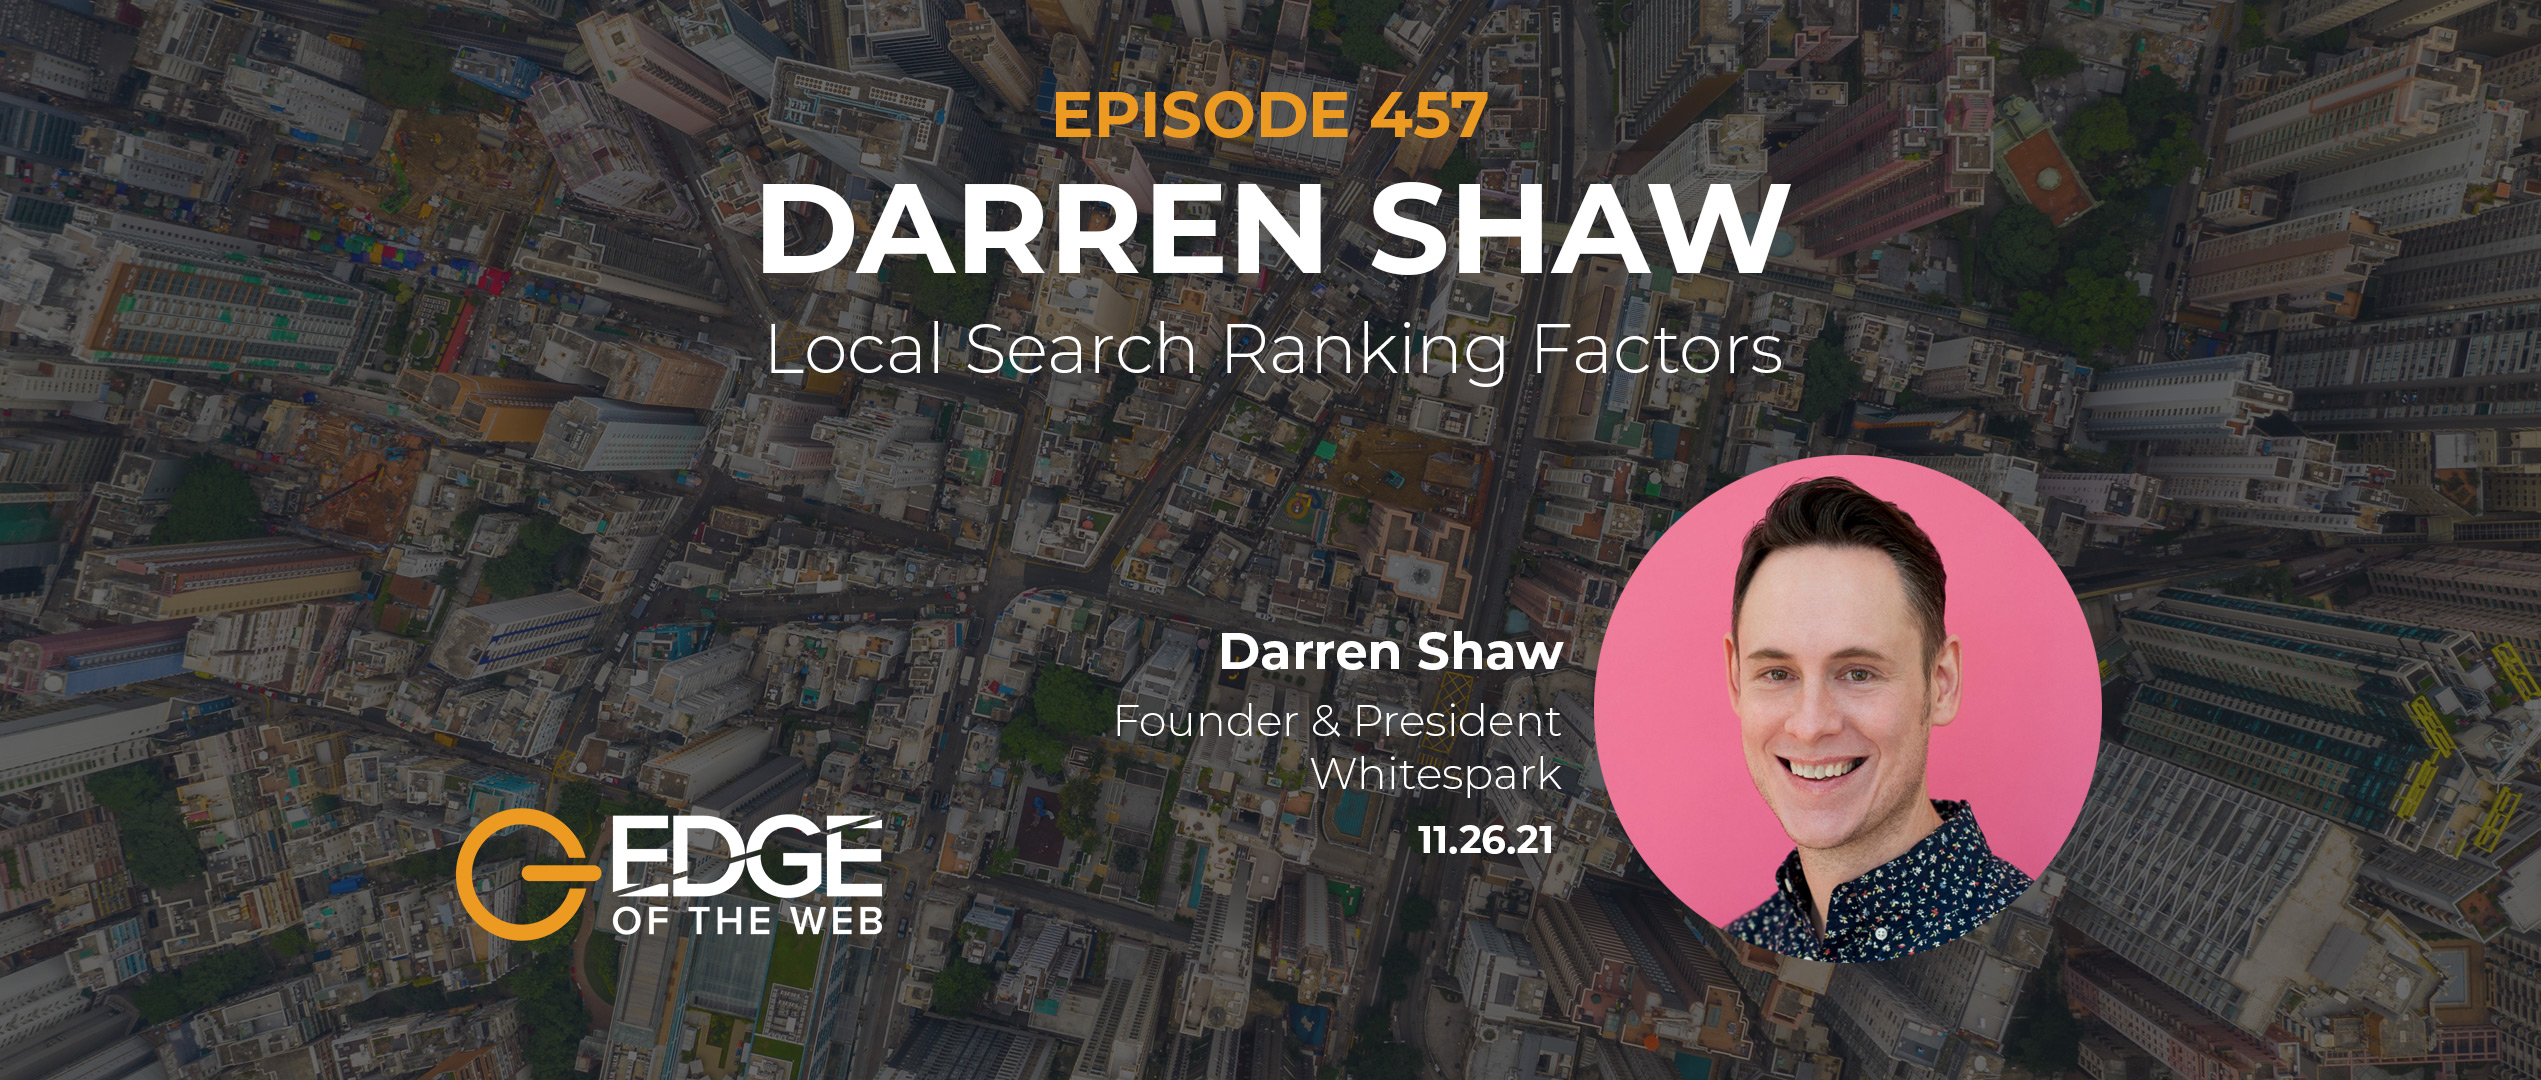 Episode 457: Local Search Ranking Factors with Darren Shaw